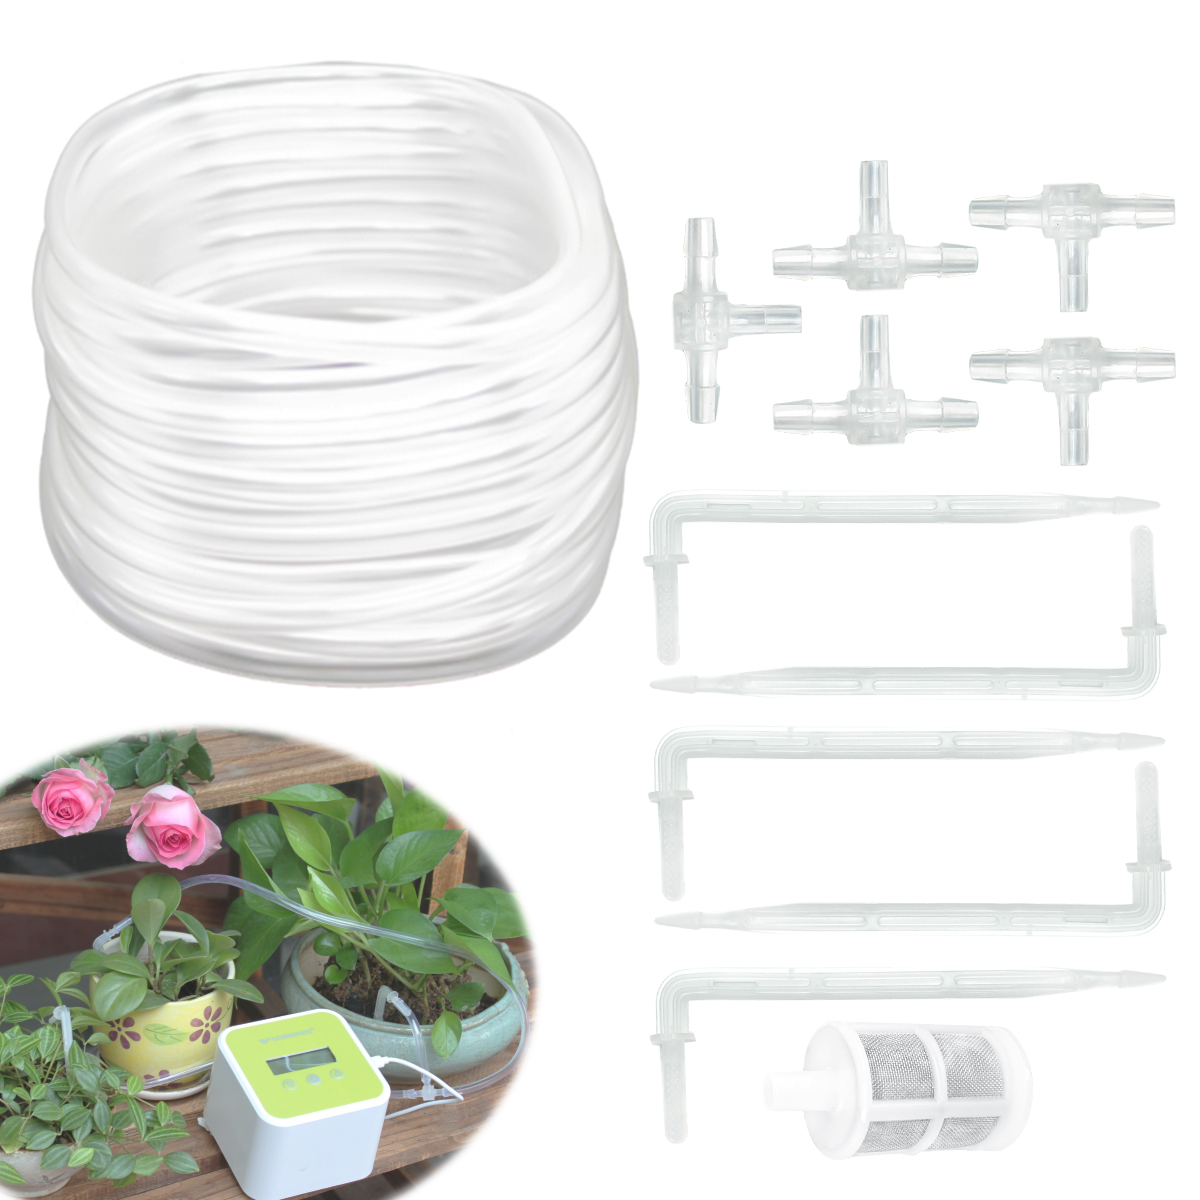 Drip Irrigaiton Kits for Automatic Irrigation System, 16ft 1/4""Tubing Drip Irrigation Accessories